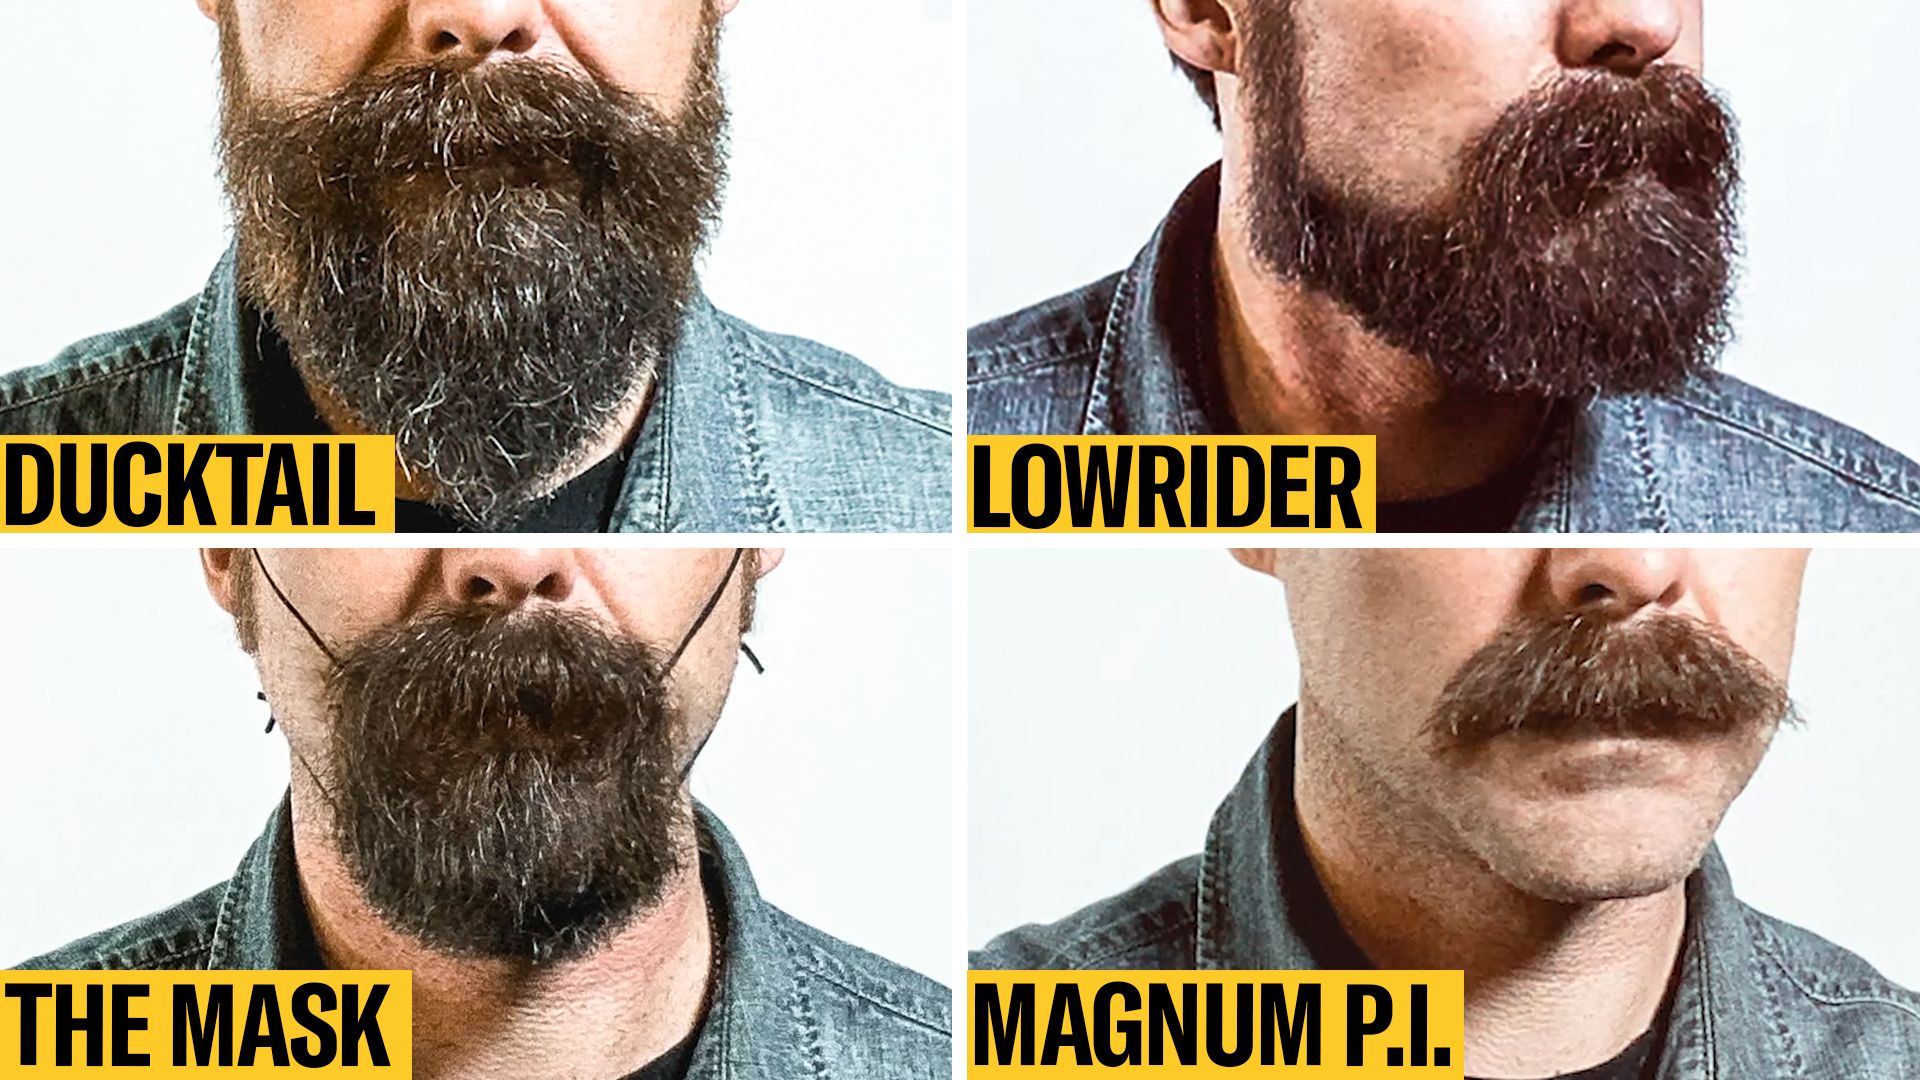 Watch 8 Facial Hair Styles On One Face From Full Beard To Clean Shaven